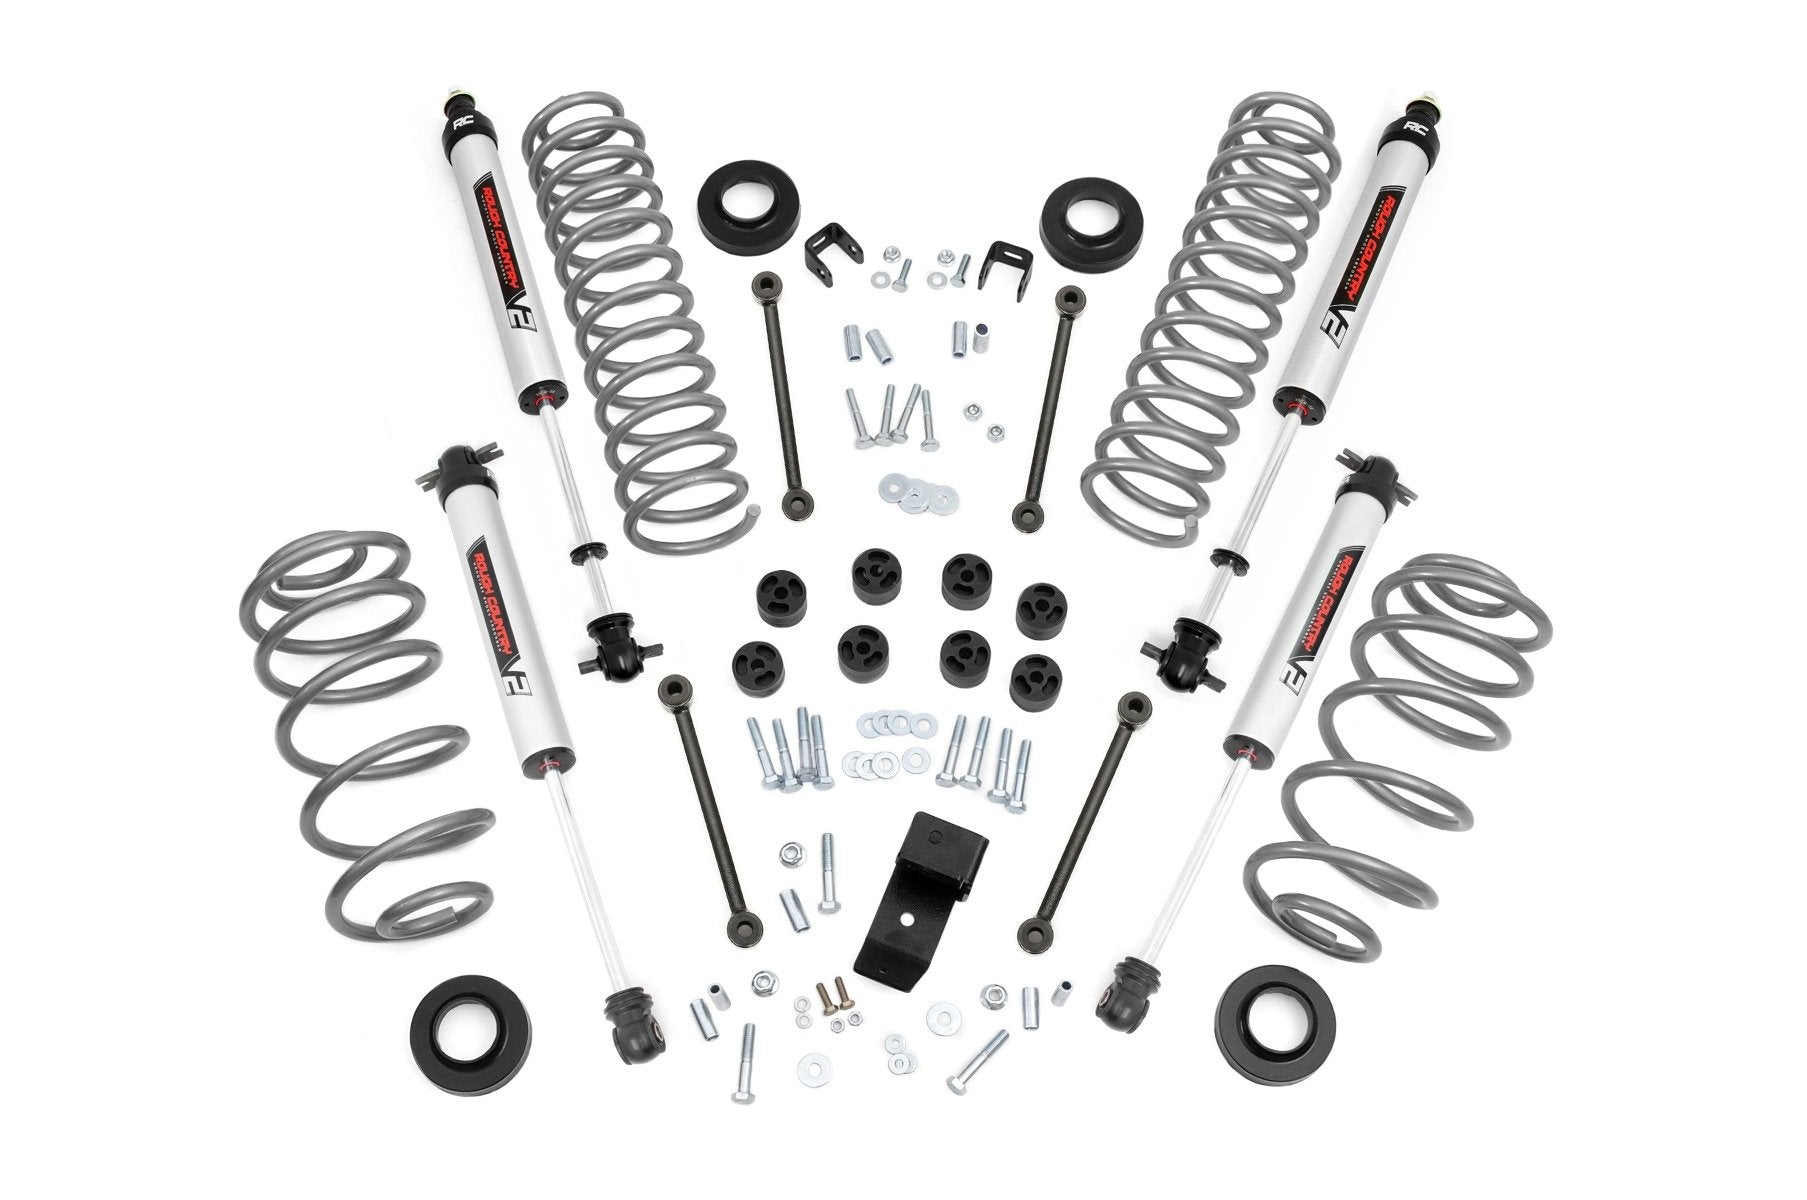 Rough Country 3.25 Inch Lift Kit | 6 Cyl | V2 | Jeep Wrangler TJ 4WD (1997-2002)